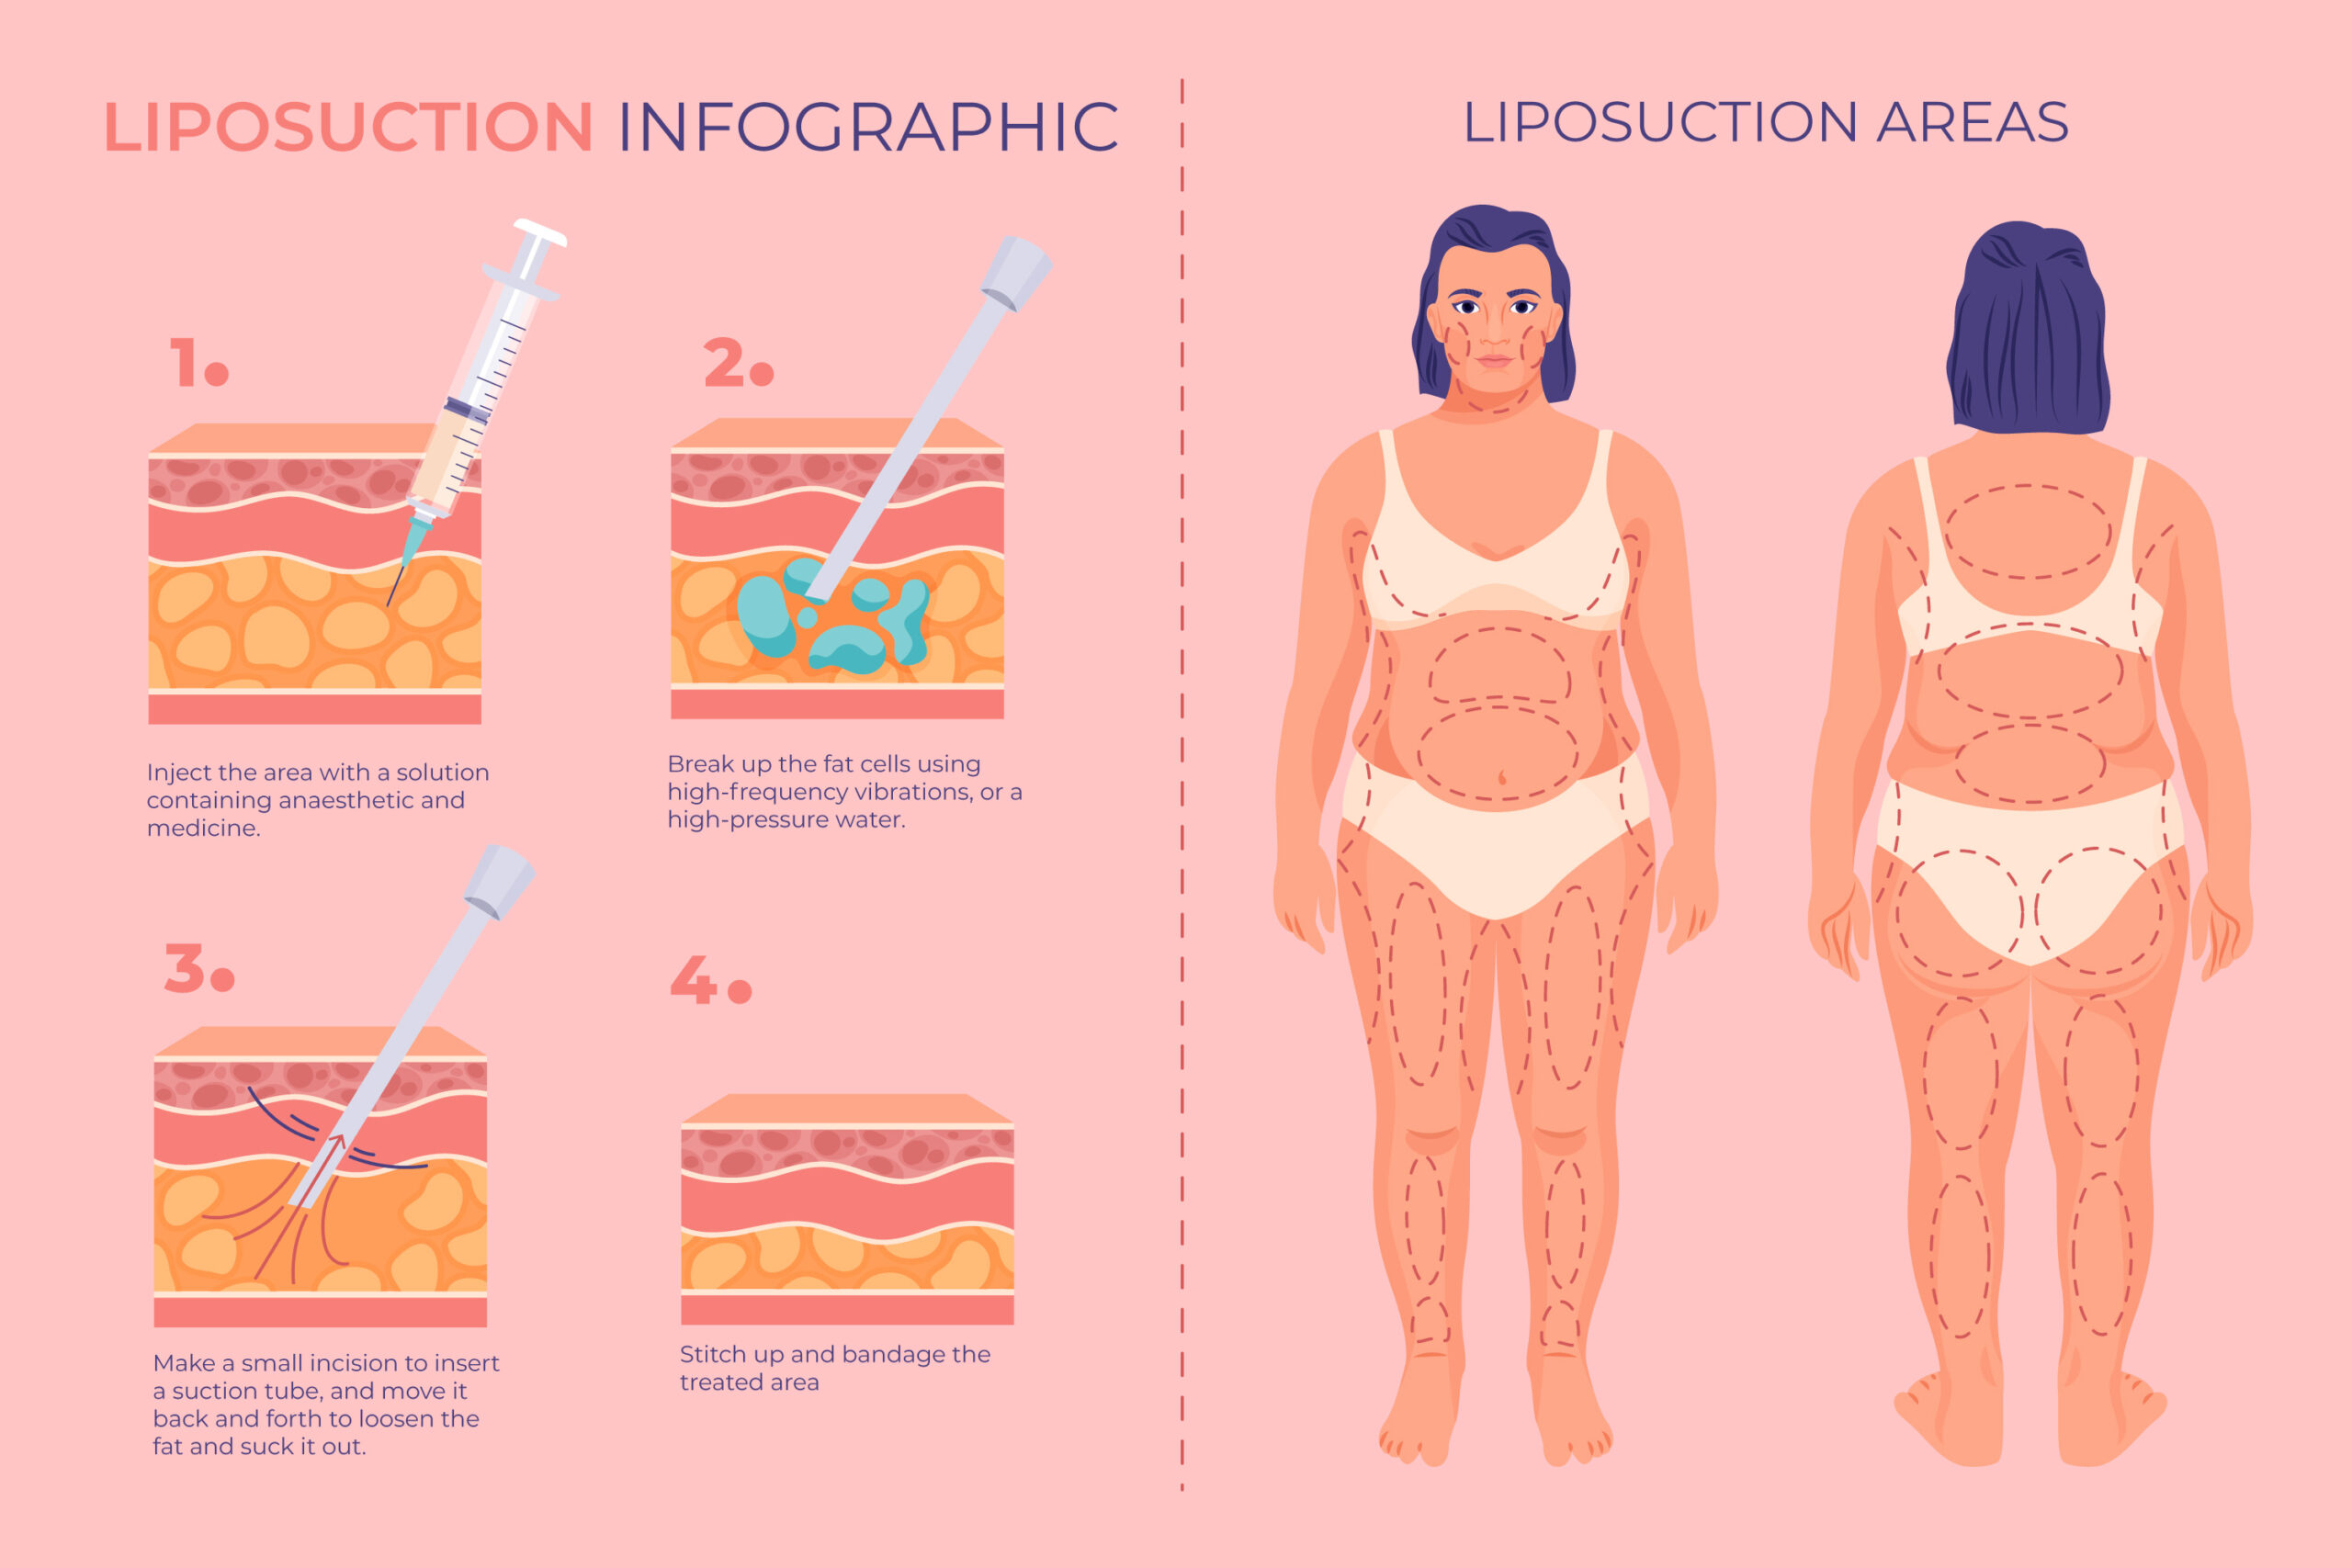 Liposuction: How It Works, Benefits, Types, and More! Update 2022